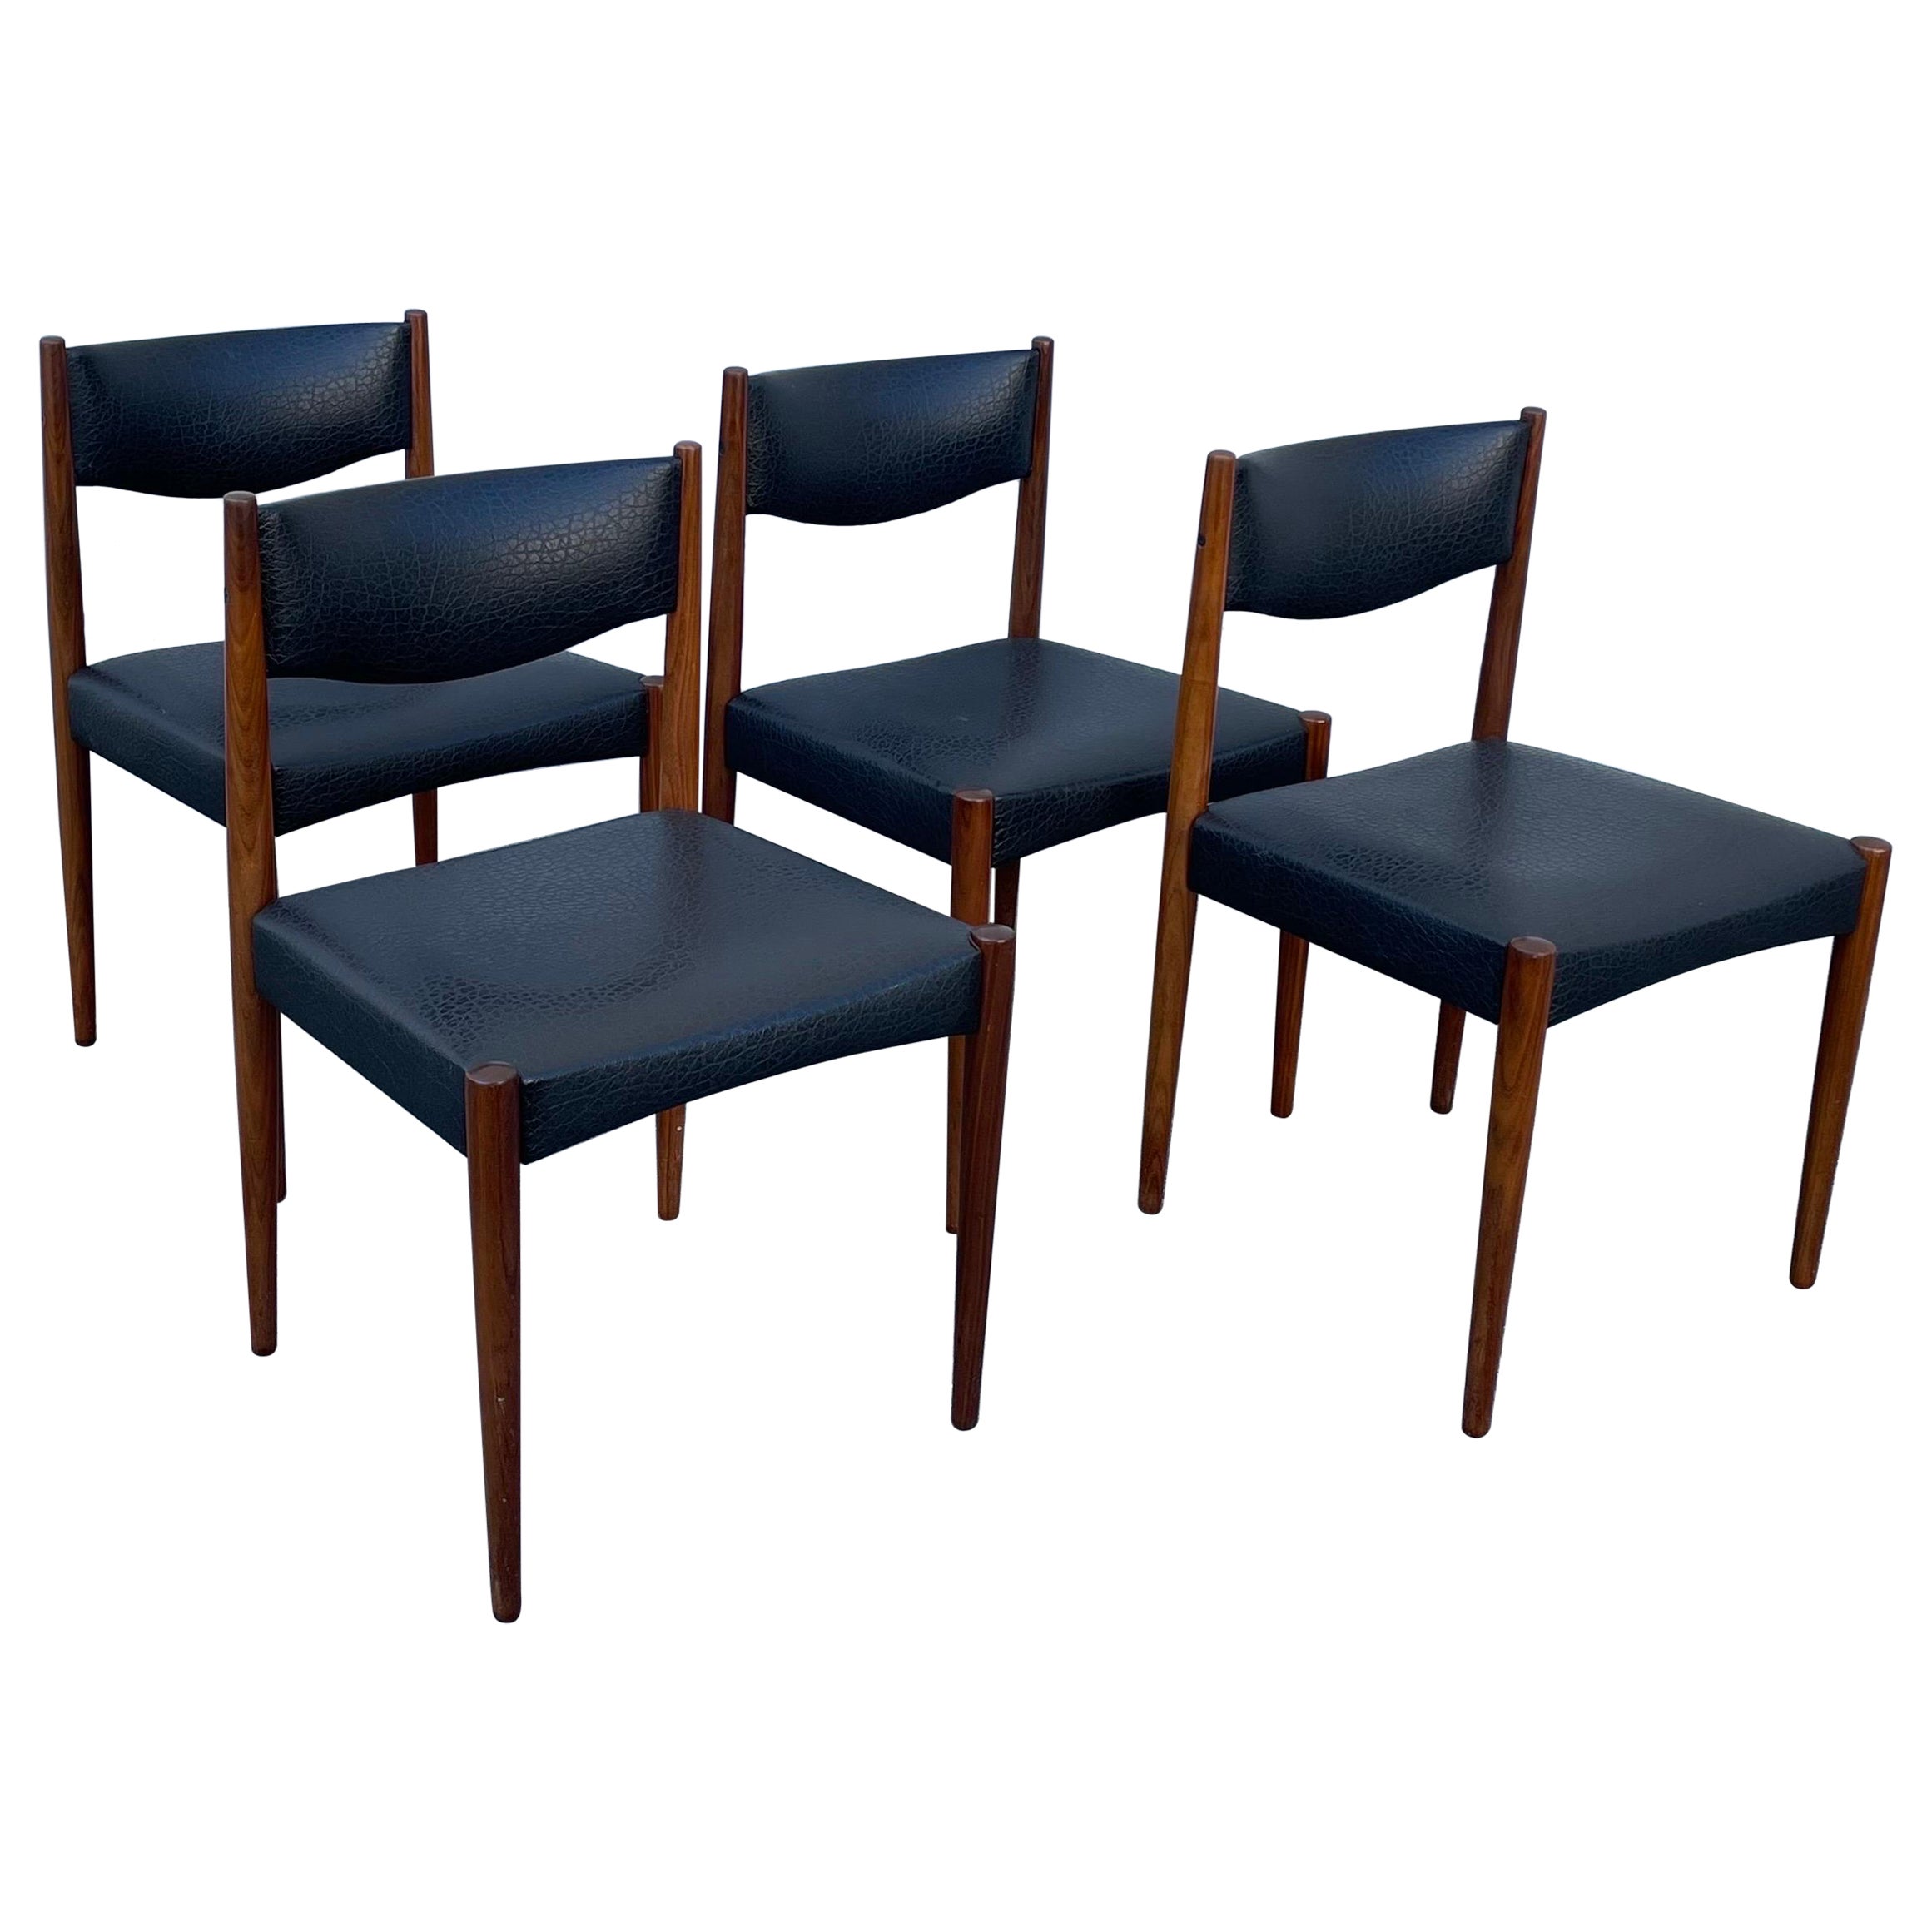 Set of Four Mid-Century Modern Teak Dining Chairs, Faux Black Leather Seats For Sale